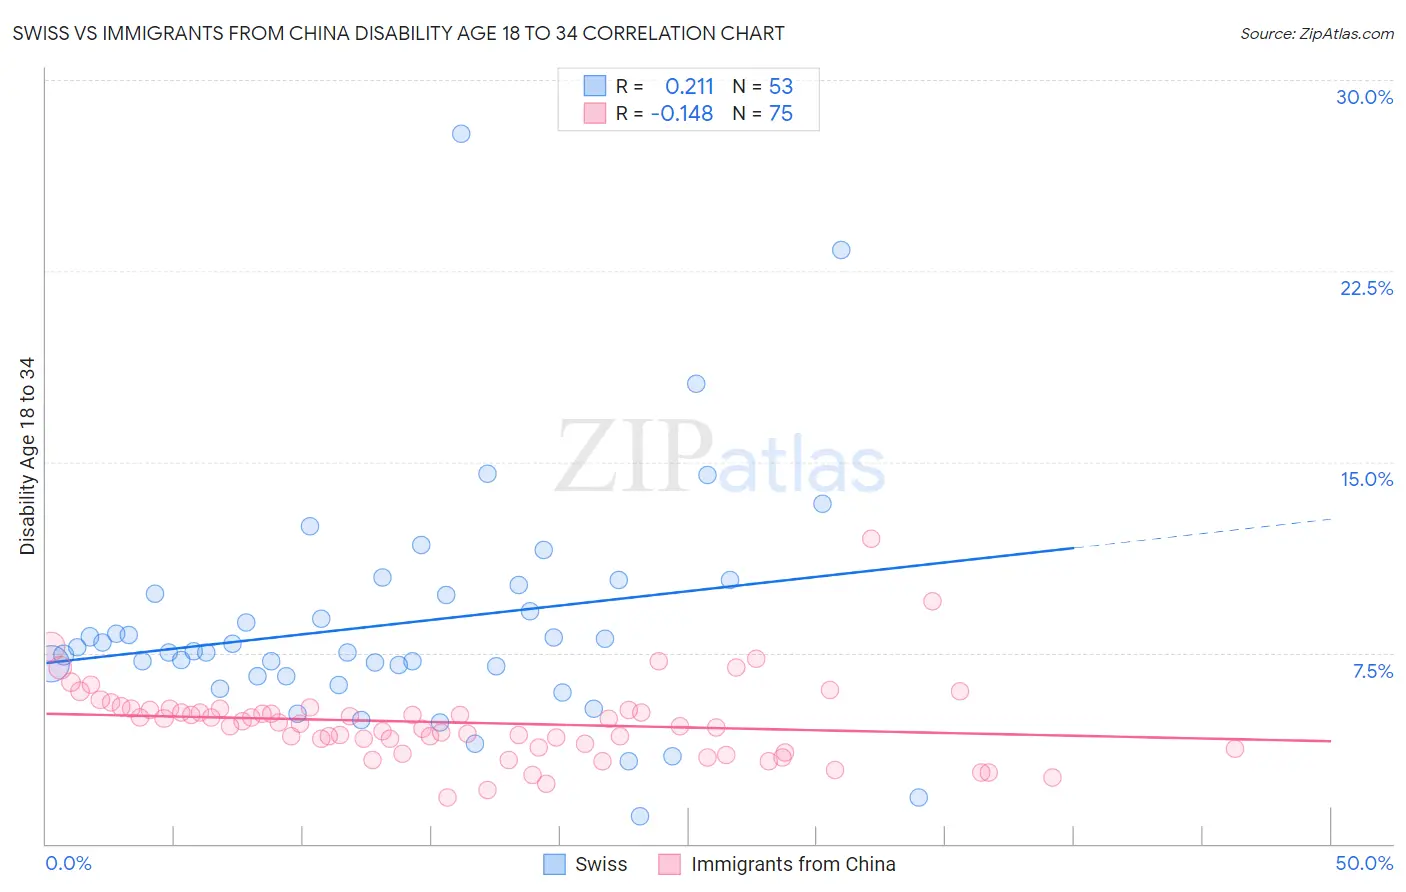 Swiss vs Immigrants from China Disability Age 18 to 34